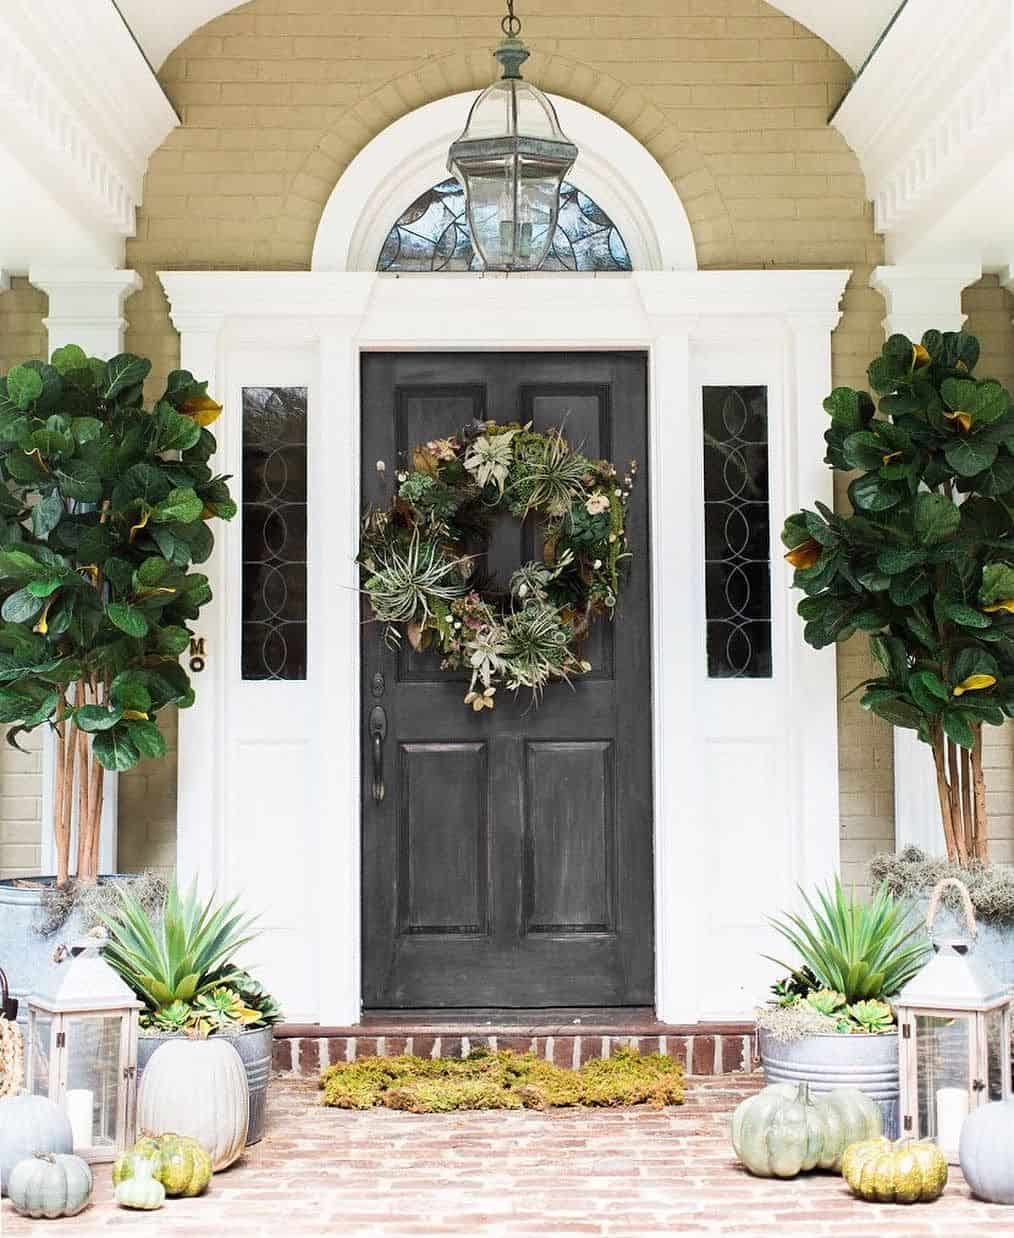 Front Porch decor with black door, large trees and plants in pots and brick walls.